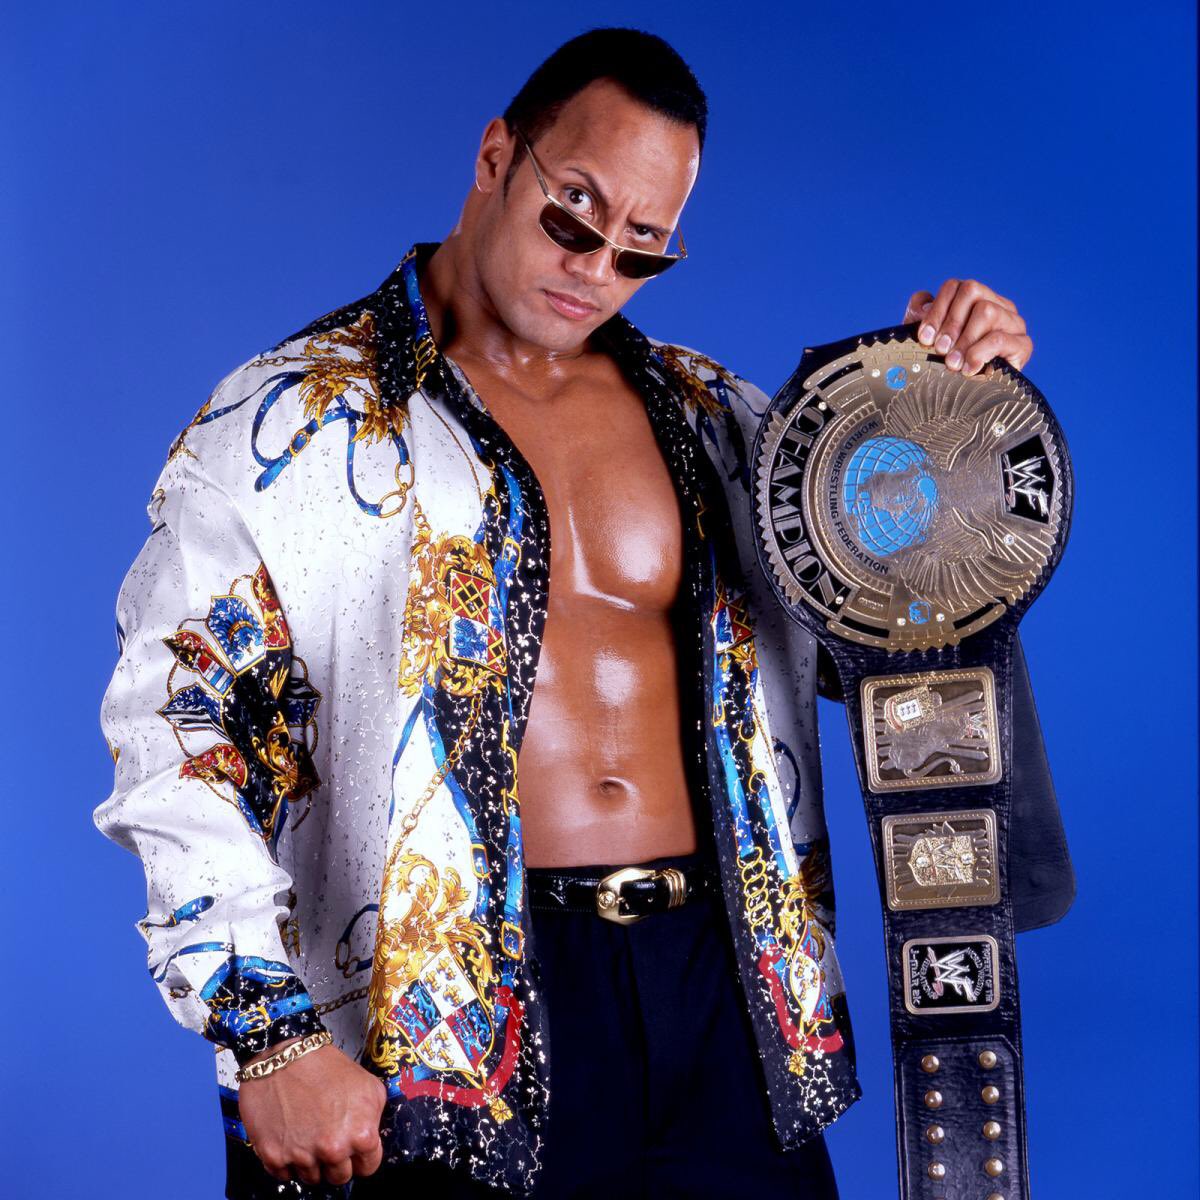 August 9 1999 - On Raw, The Rock would win his 5th WWF Championship by DQ after Chris Jericho attacked him as he was about to deliver the People’s Elbow. #WWE  #AlternateHistory